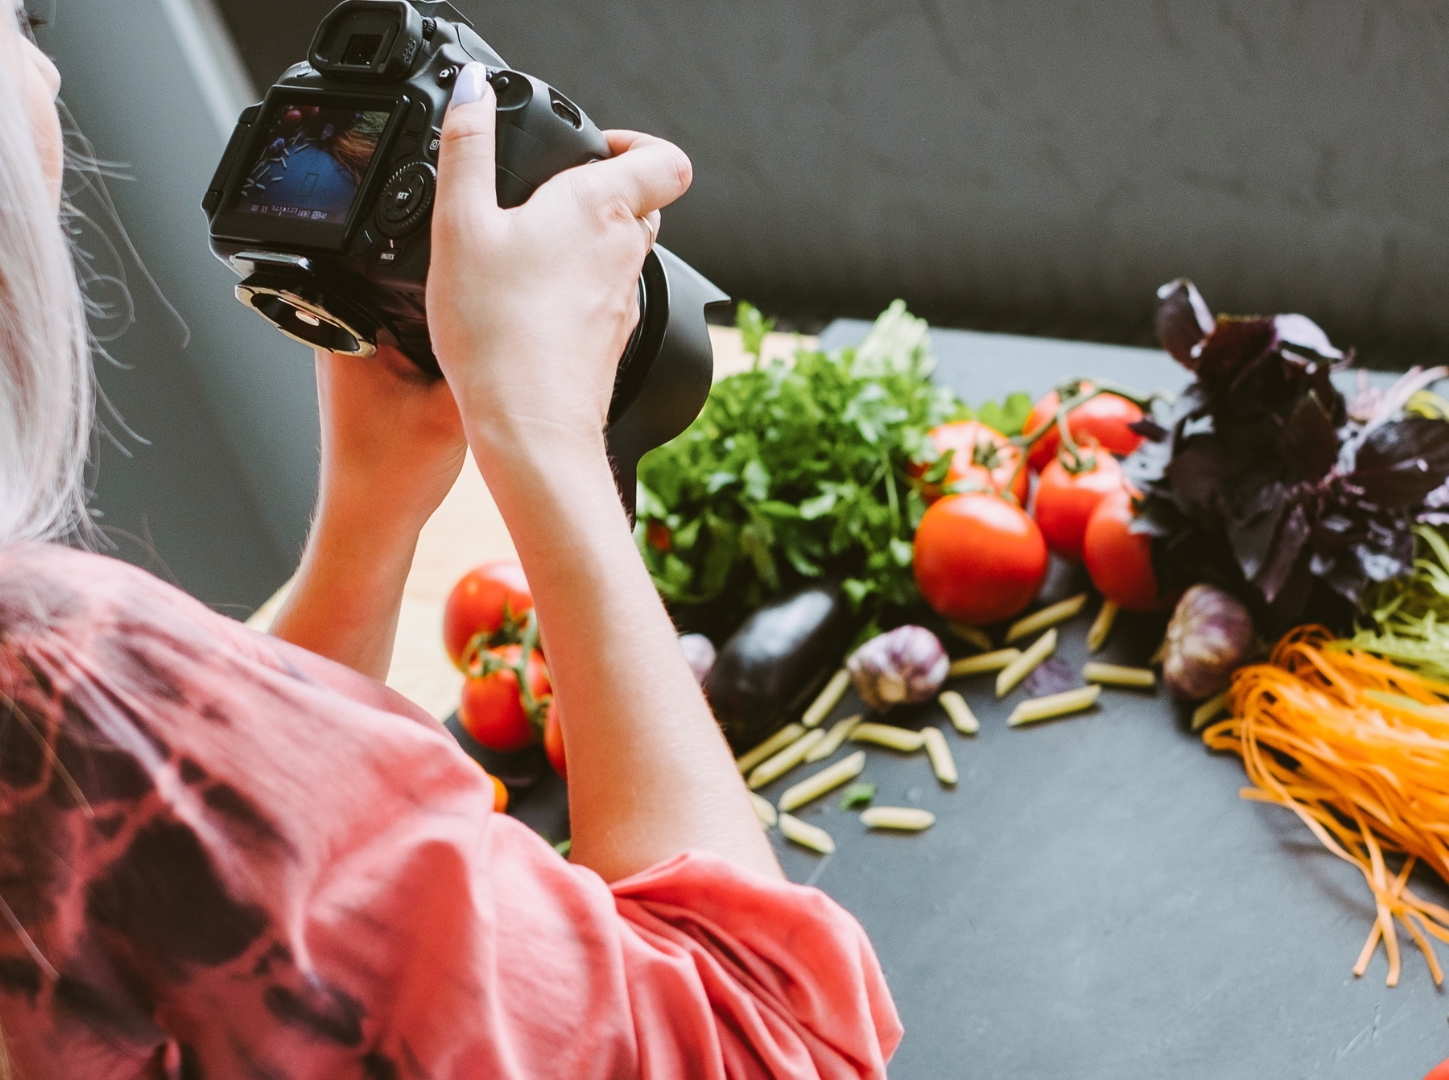 Two-hands-of-silver-hair-female-mode-hold-camera-and-take-a-picture-of-food-ingredients-in-her-studio